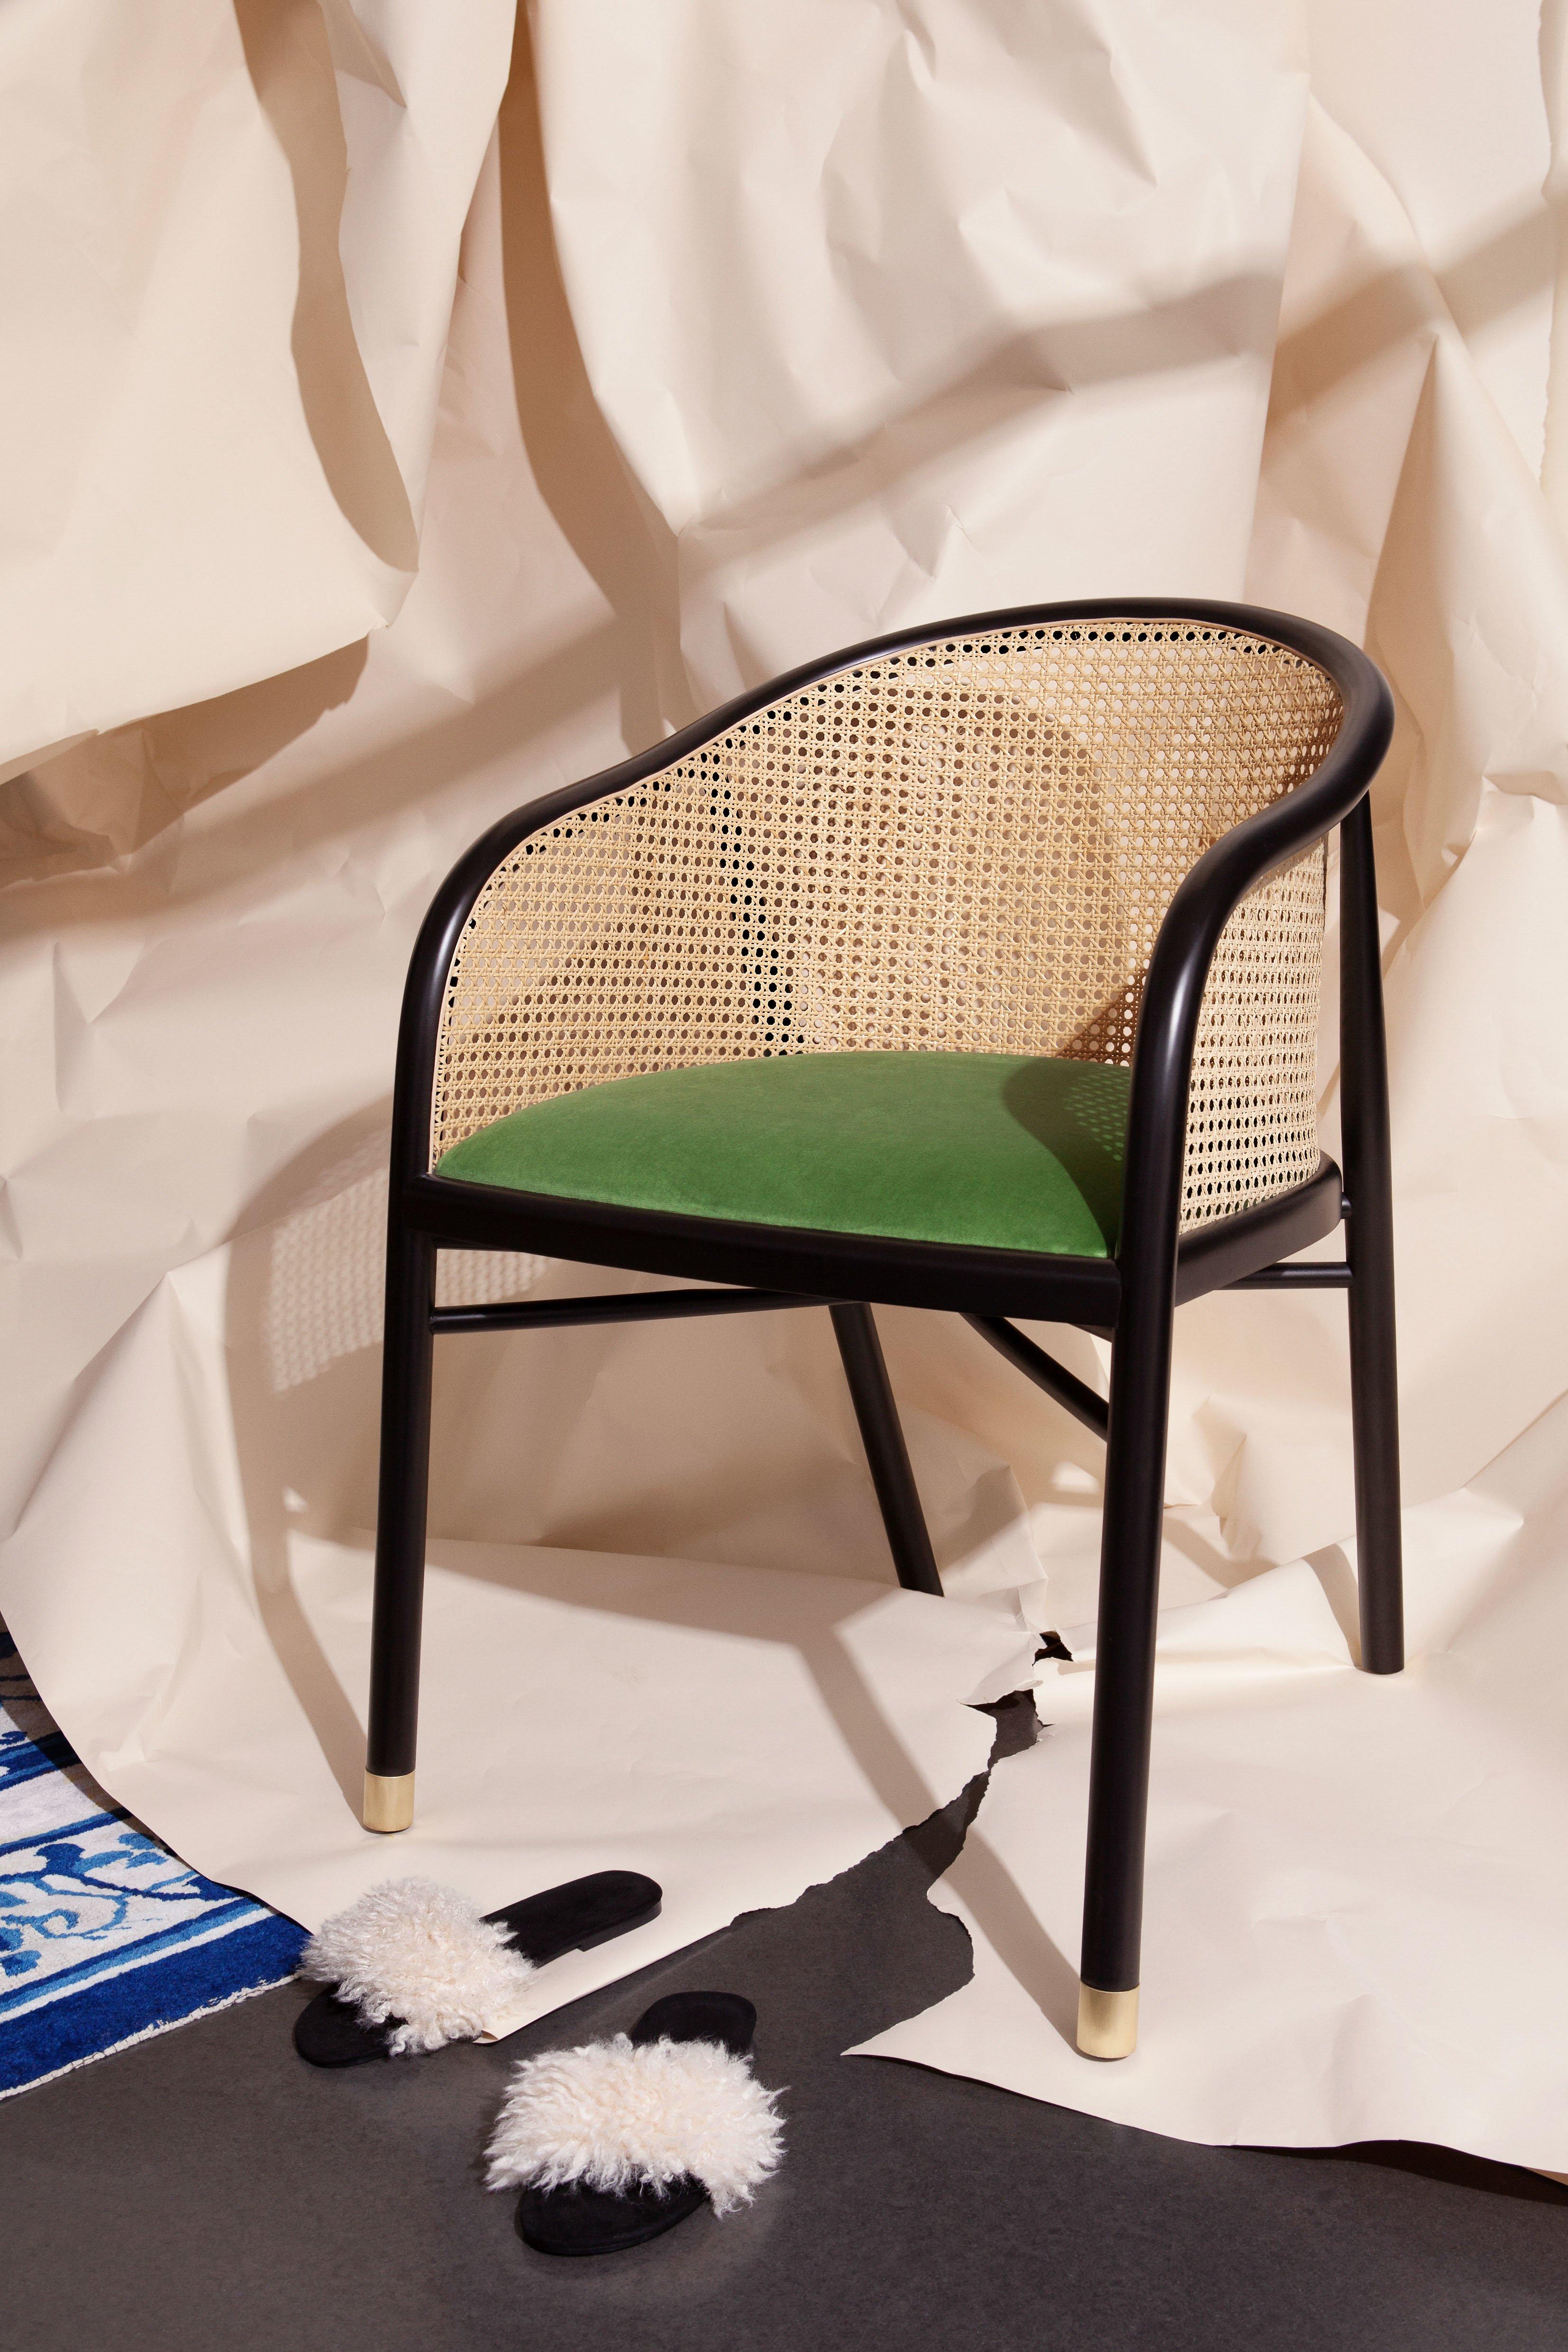 Classic but with a contemporary touch, this chair can be set in an entrance hall, as a desk chair, or an armchair at the dining table. Made of black beech-wood and natural cane with upholstered seat in a choice of leopard print, green, or brick red